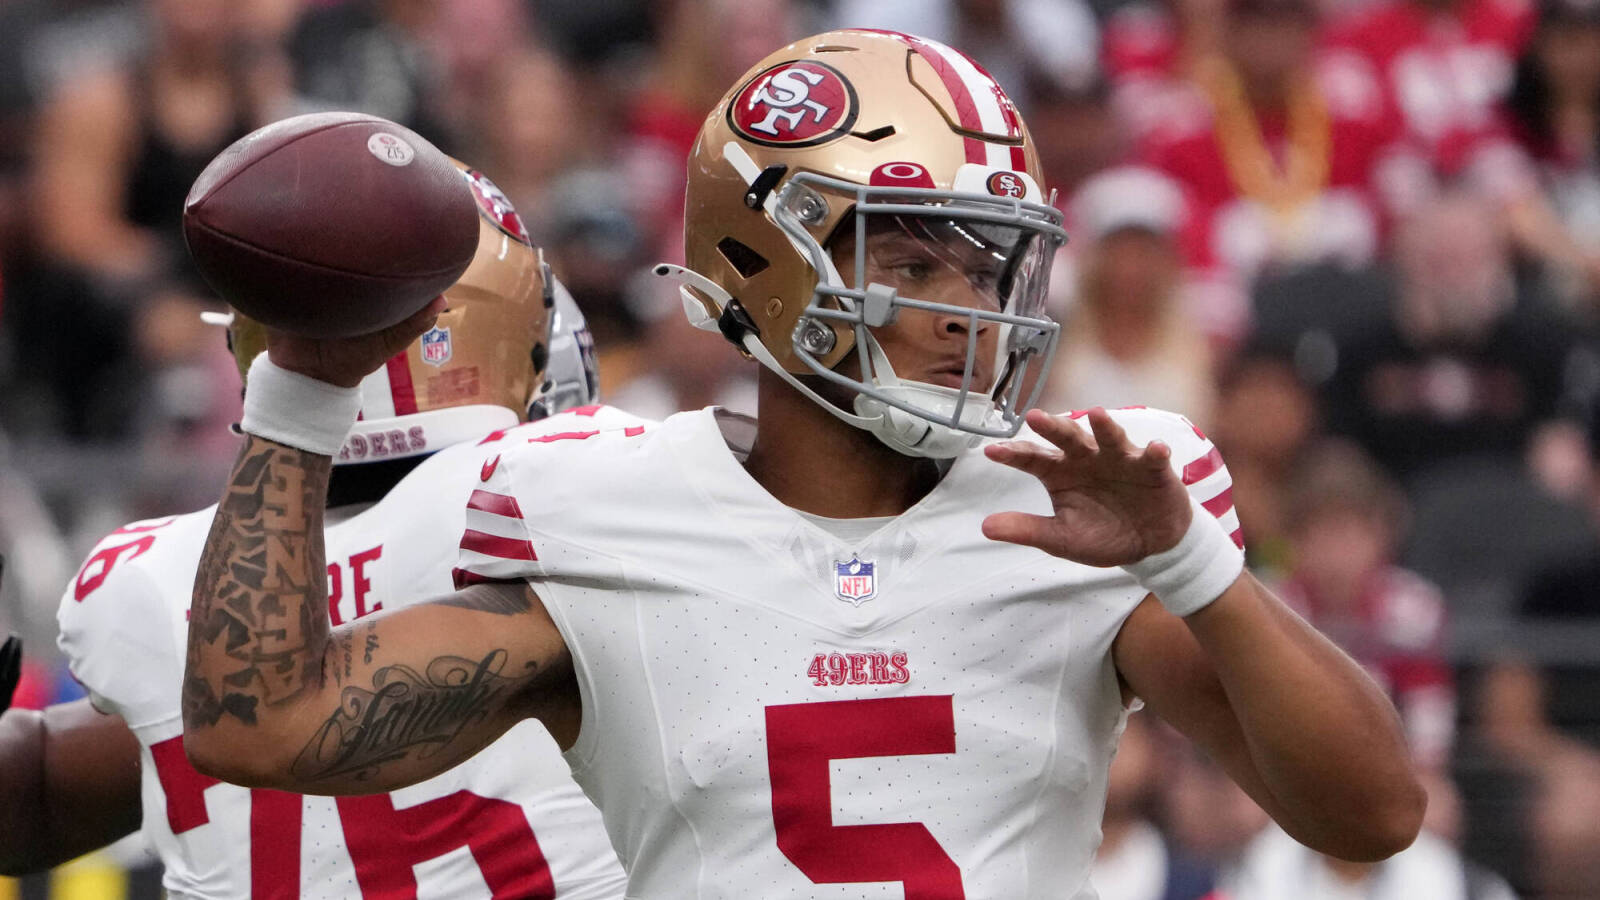 Radio host suggests 49ers QB join the CFL